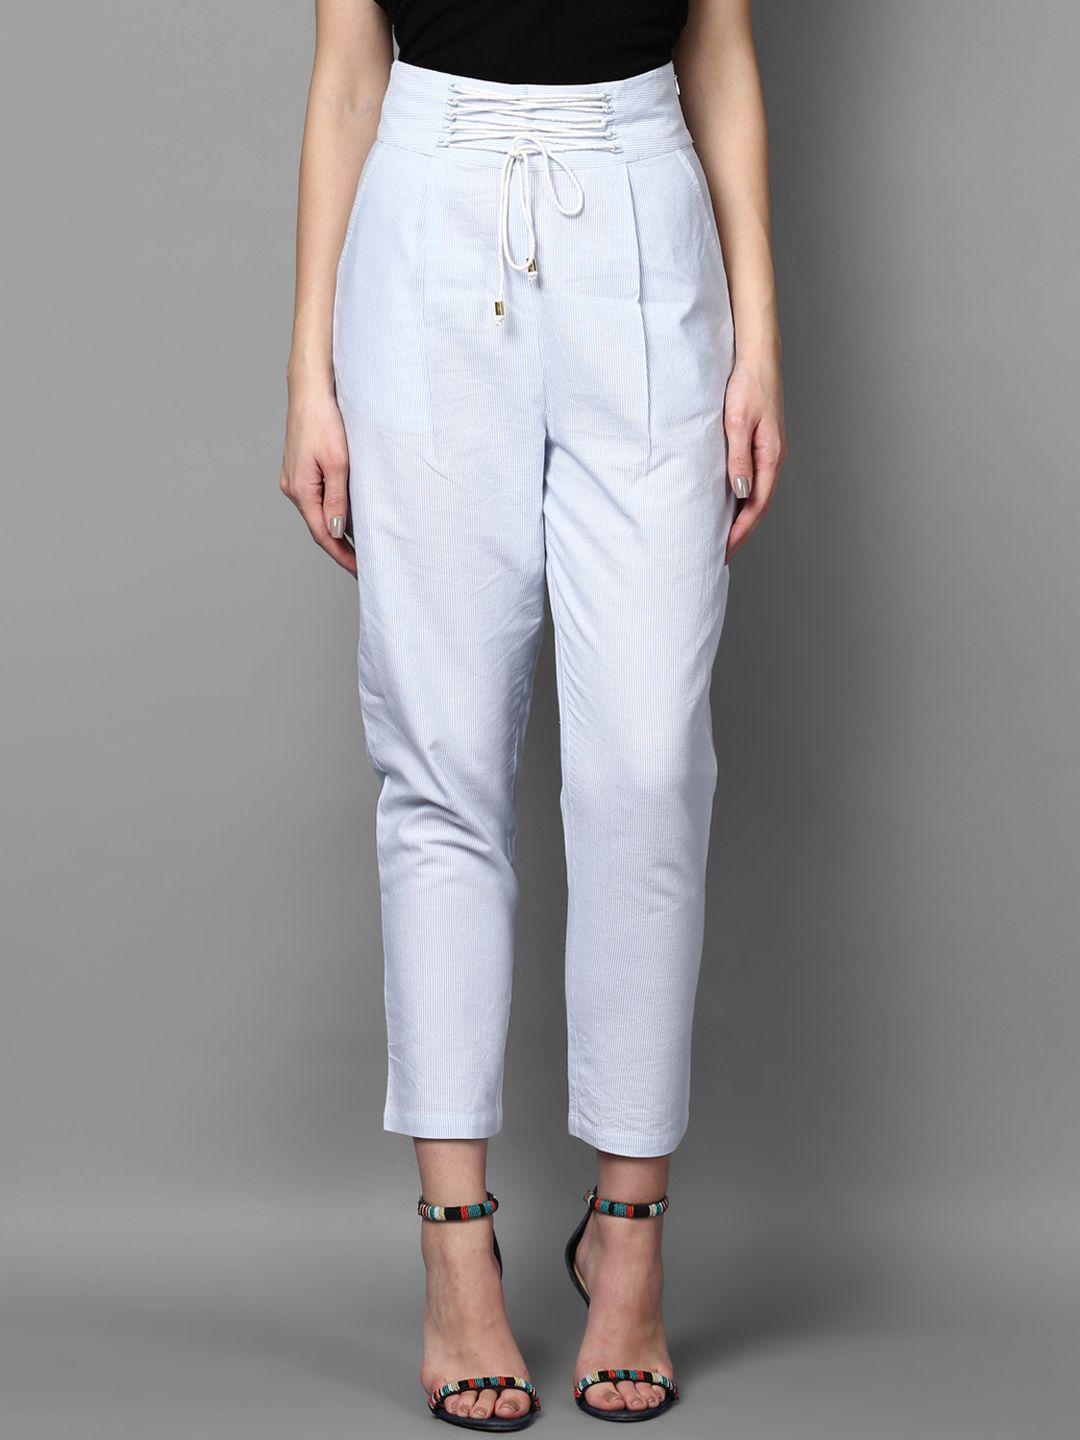 street 9 women white & blue relaxed slim fit striped cigarette trousers